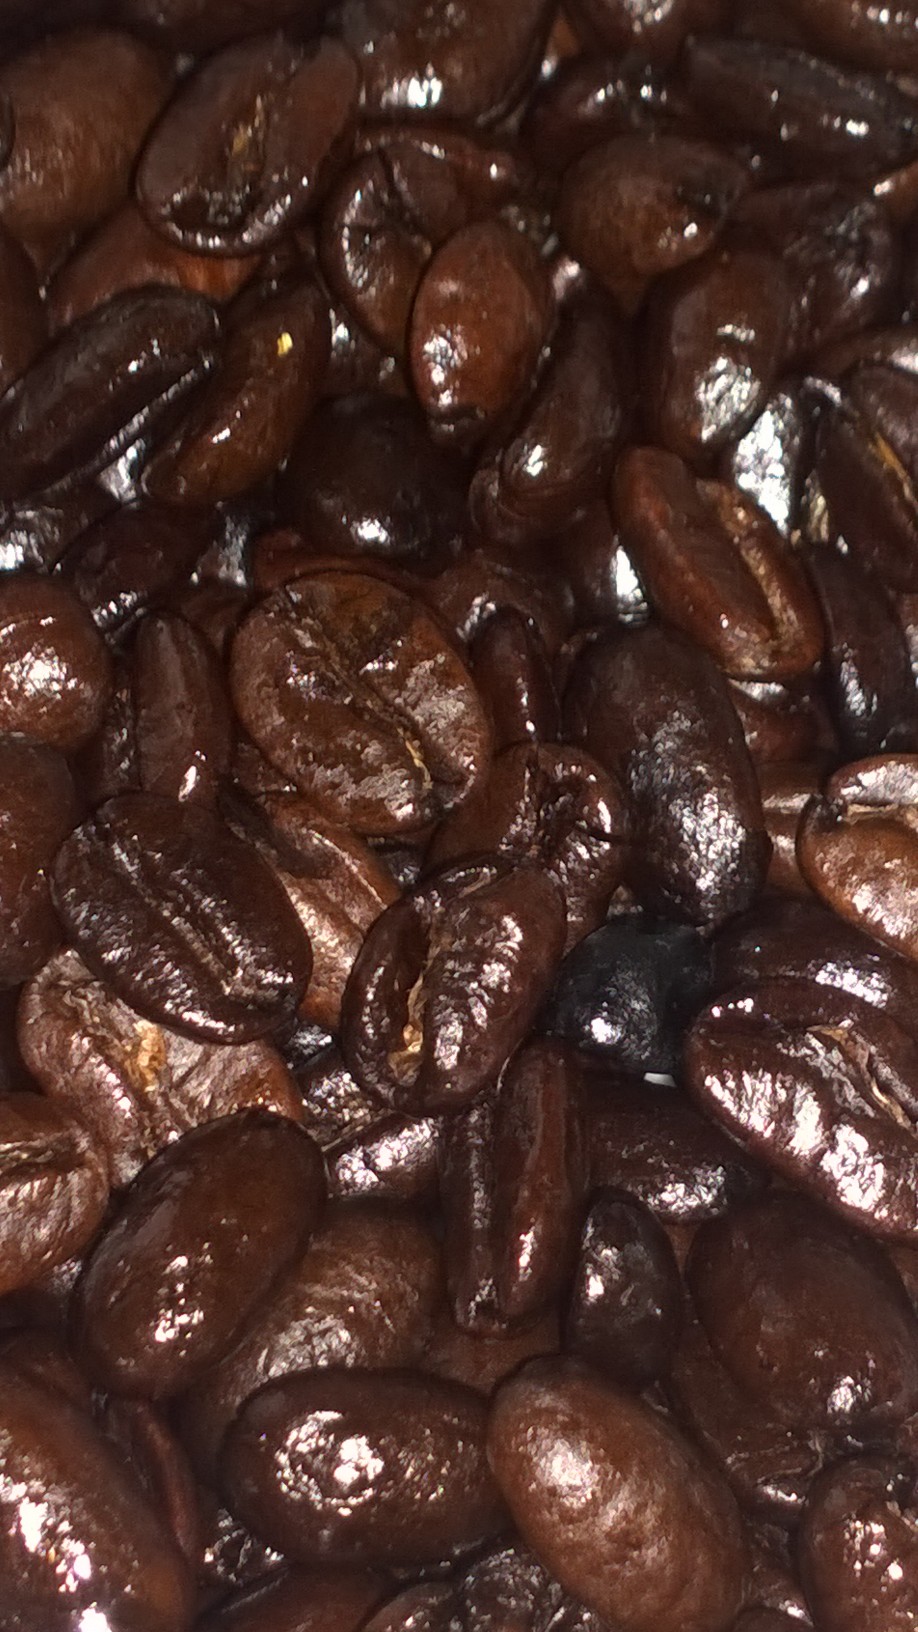 Roasted coffee beans Laos